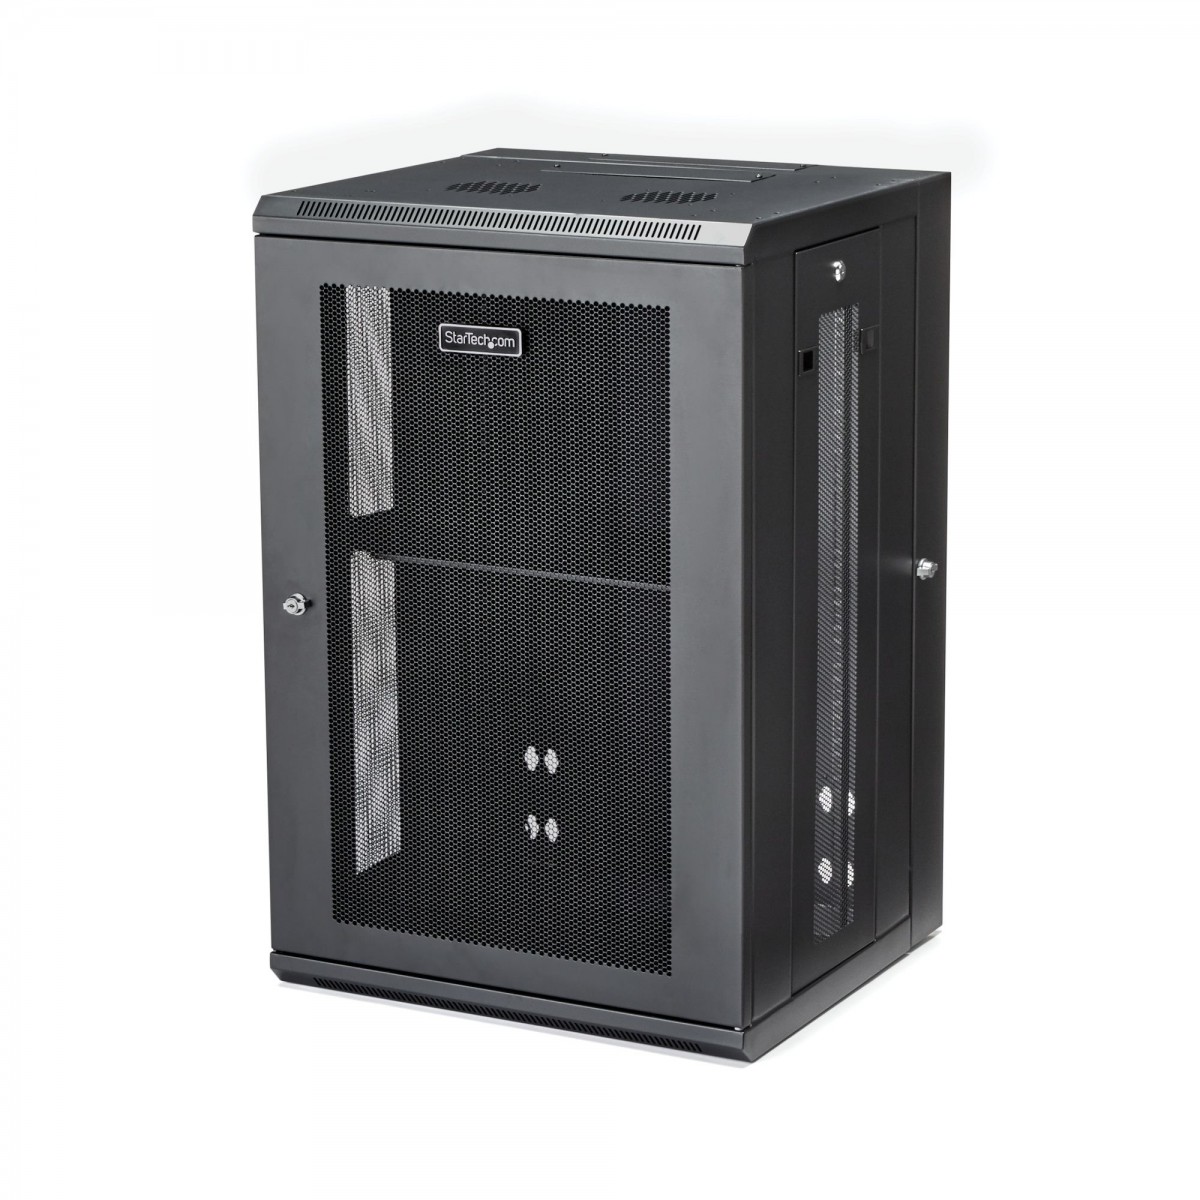 StarTech.com 18U 19" Wall Mount Network Cabinet - 16" Deep Hinged Locking IT Network Switch Depth Enclosure - Assembled Vented C